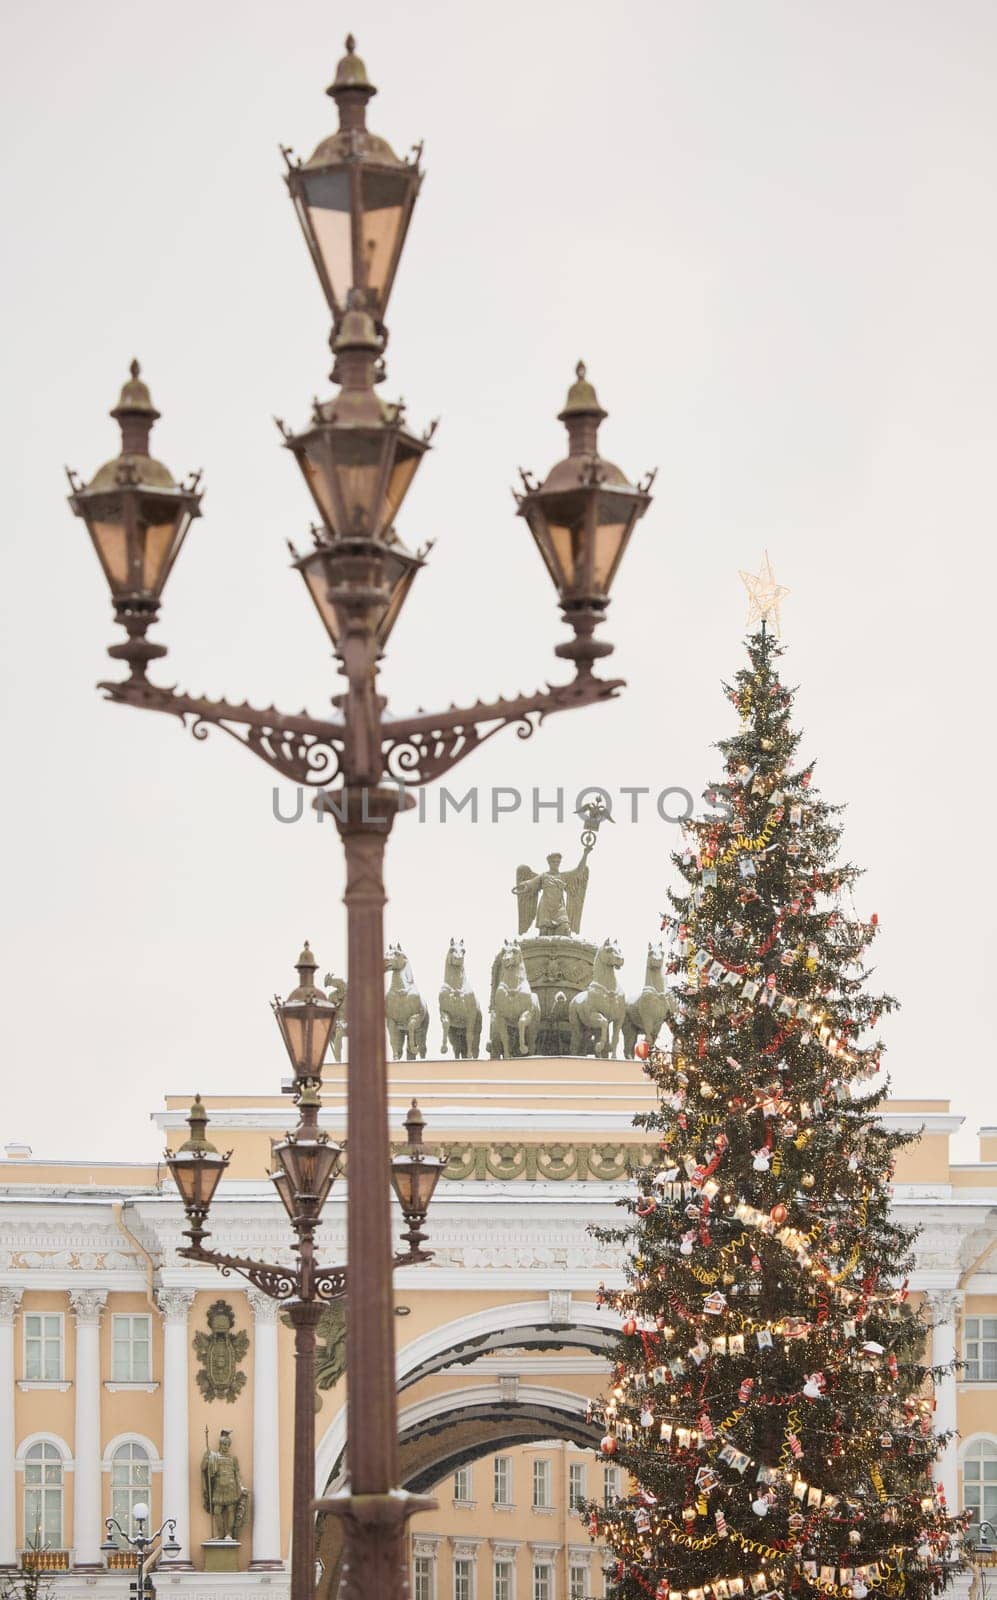 The main Christmas tree shimmers with lights of decorations through vintage lamppost, the central Palace square of the city decorated for the celebration during the snowfall, Arch of the General Staff by vladimirdrozdin